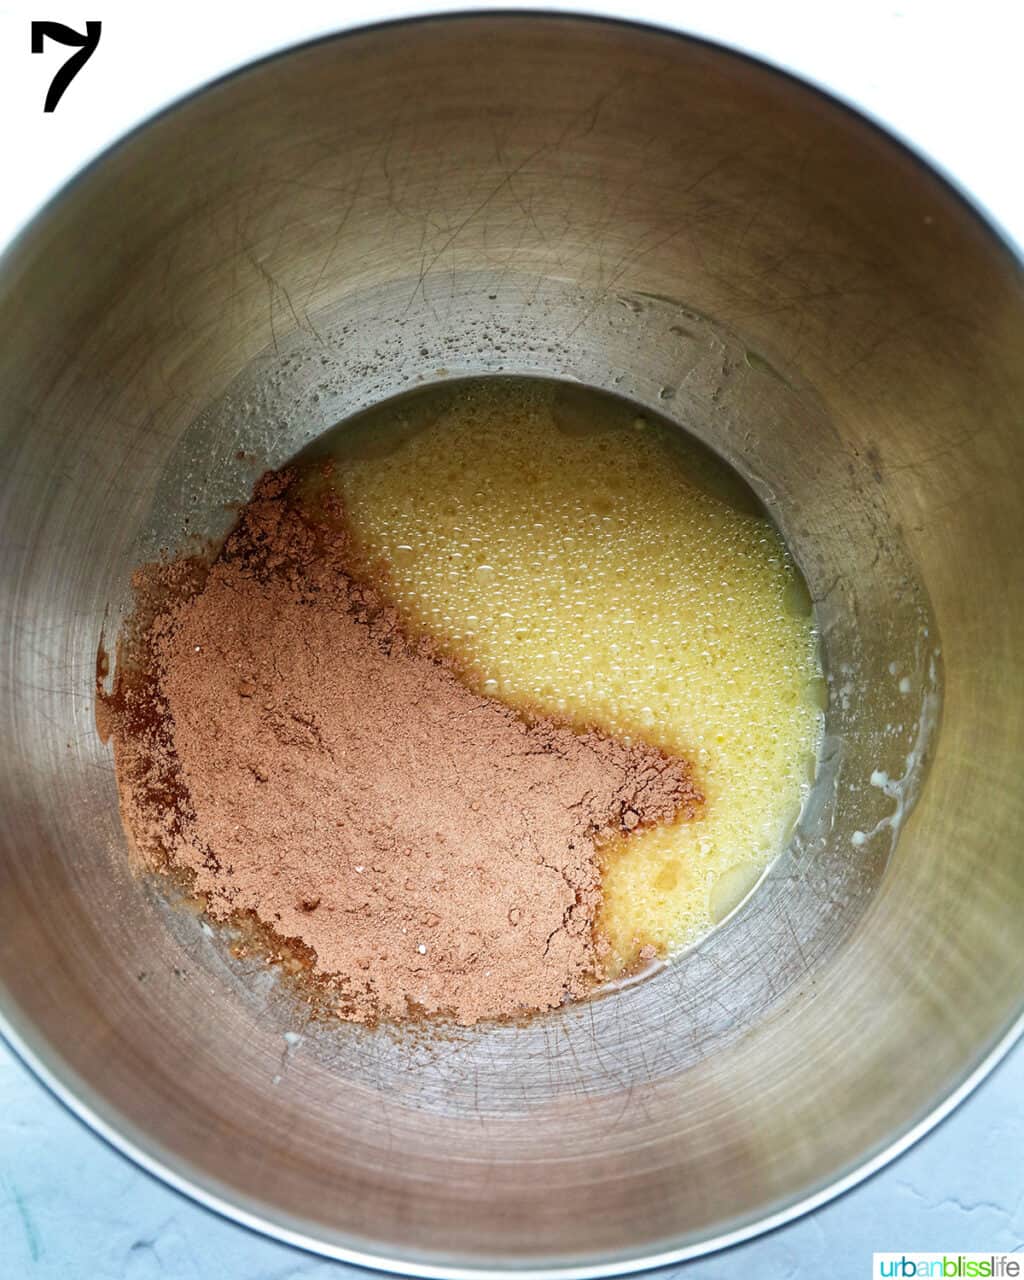 cocoa powder added to bowl of a stand mixer with wet ingredients to make chocolate fudge cupcakes.